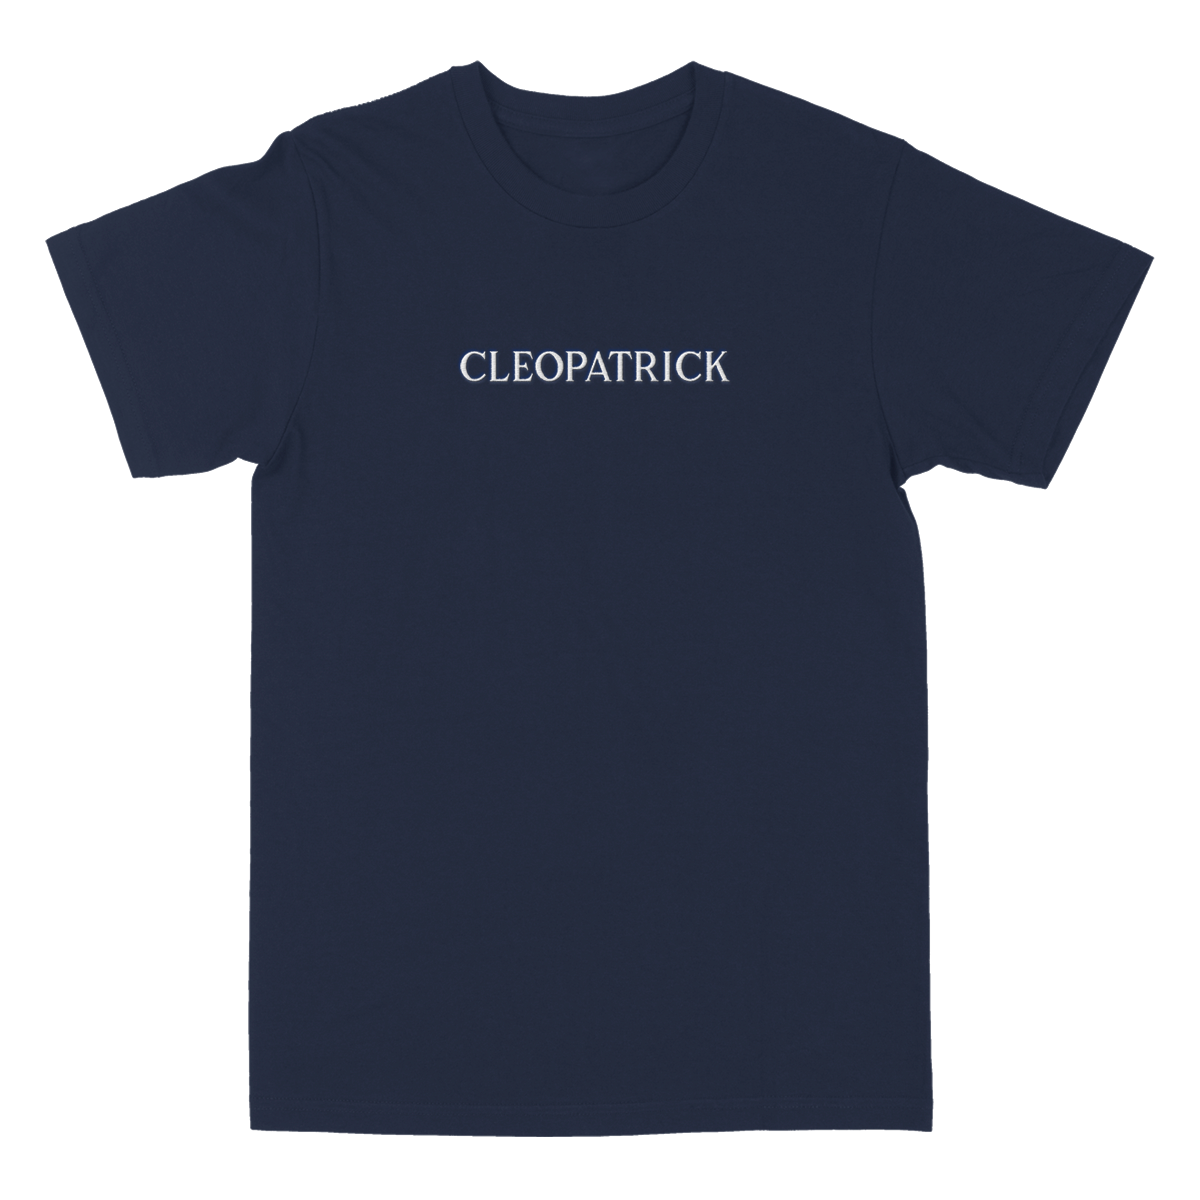 "CLEOPATRICK" EMBROIDERED NAVY T-SHIRT